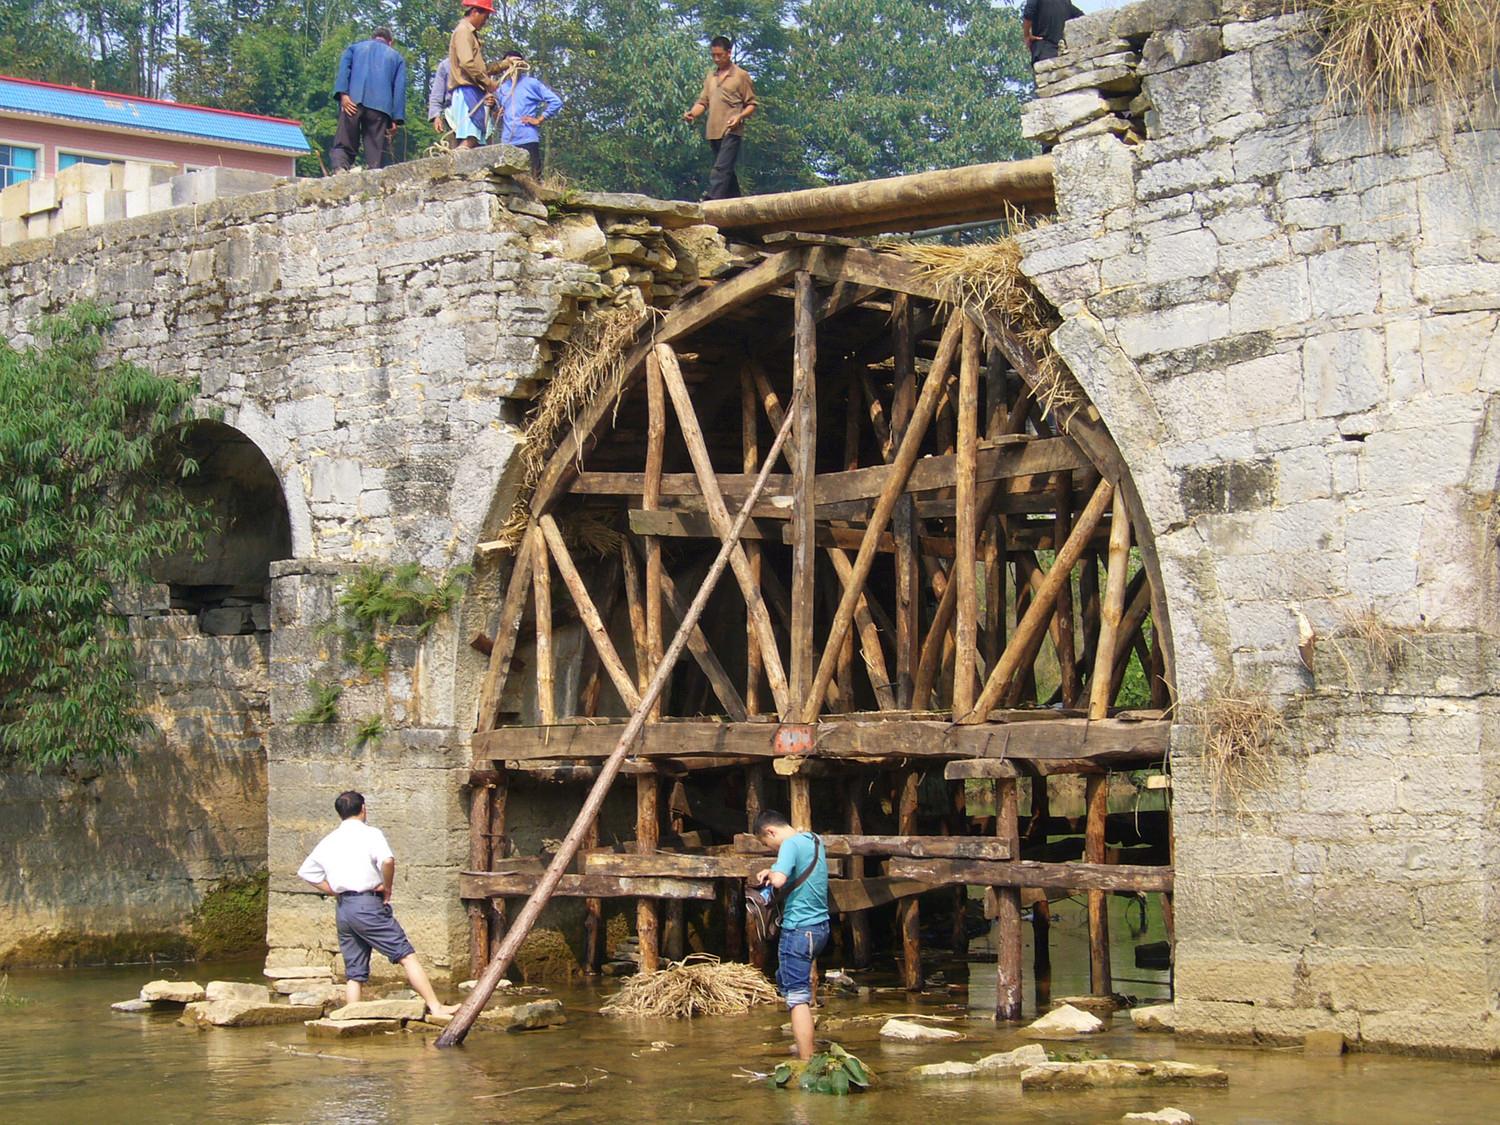 Bridge during construction with scaffolding